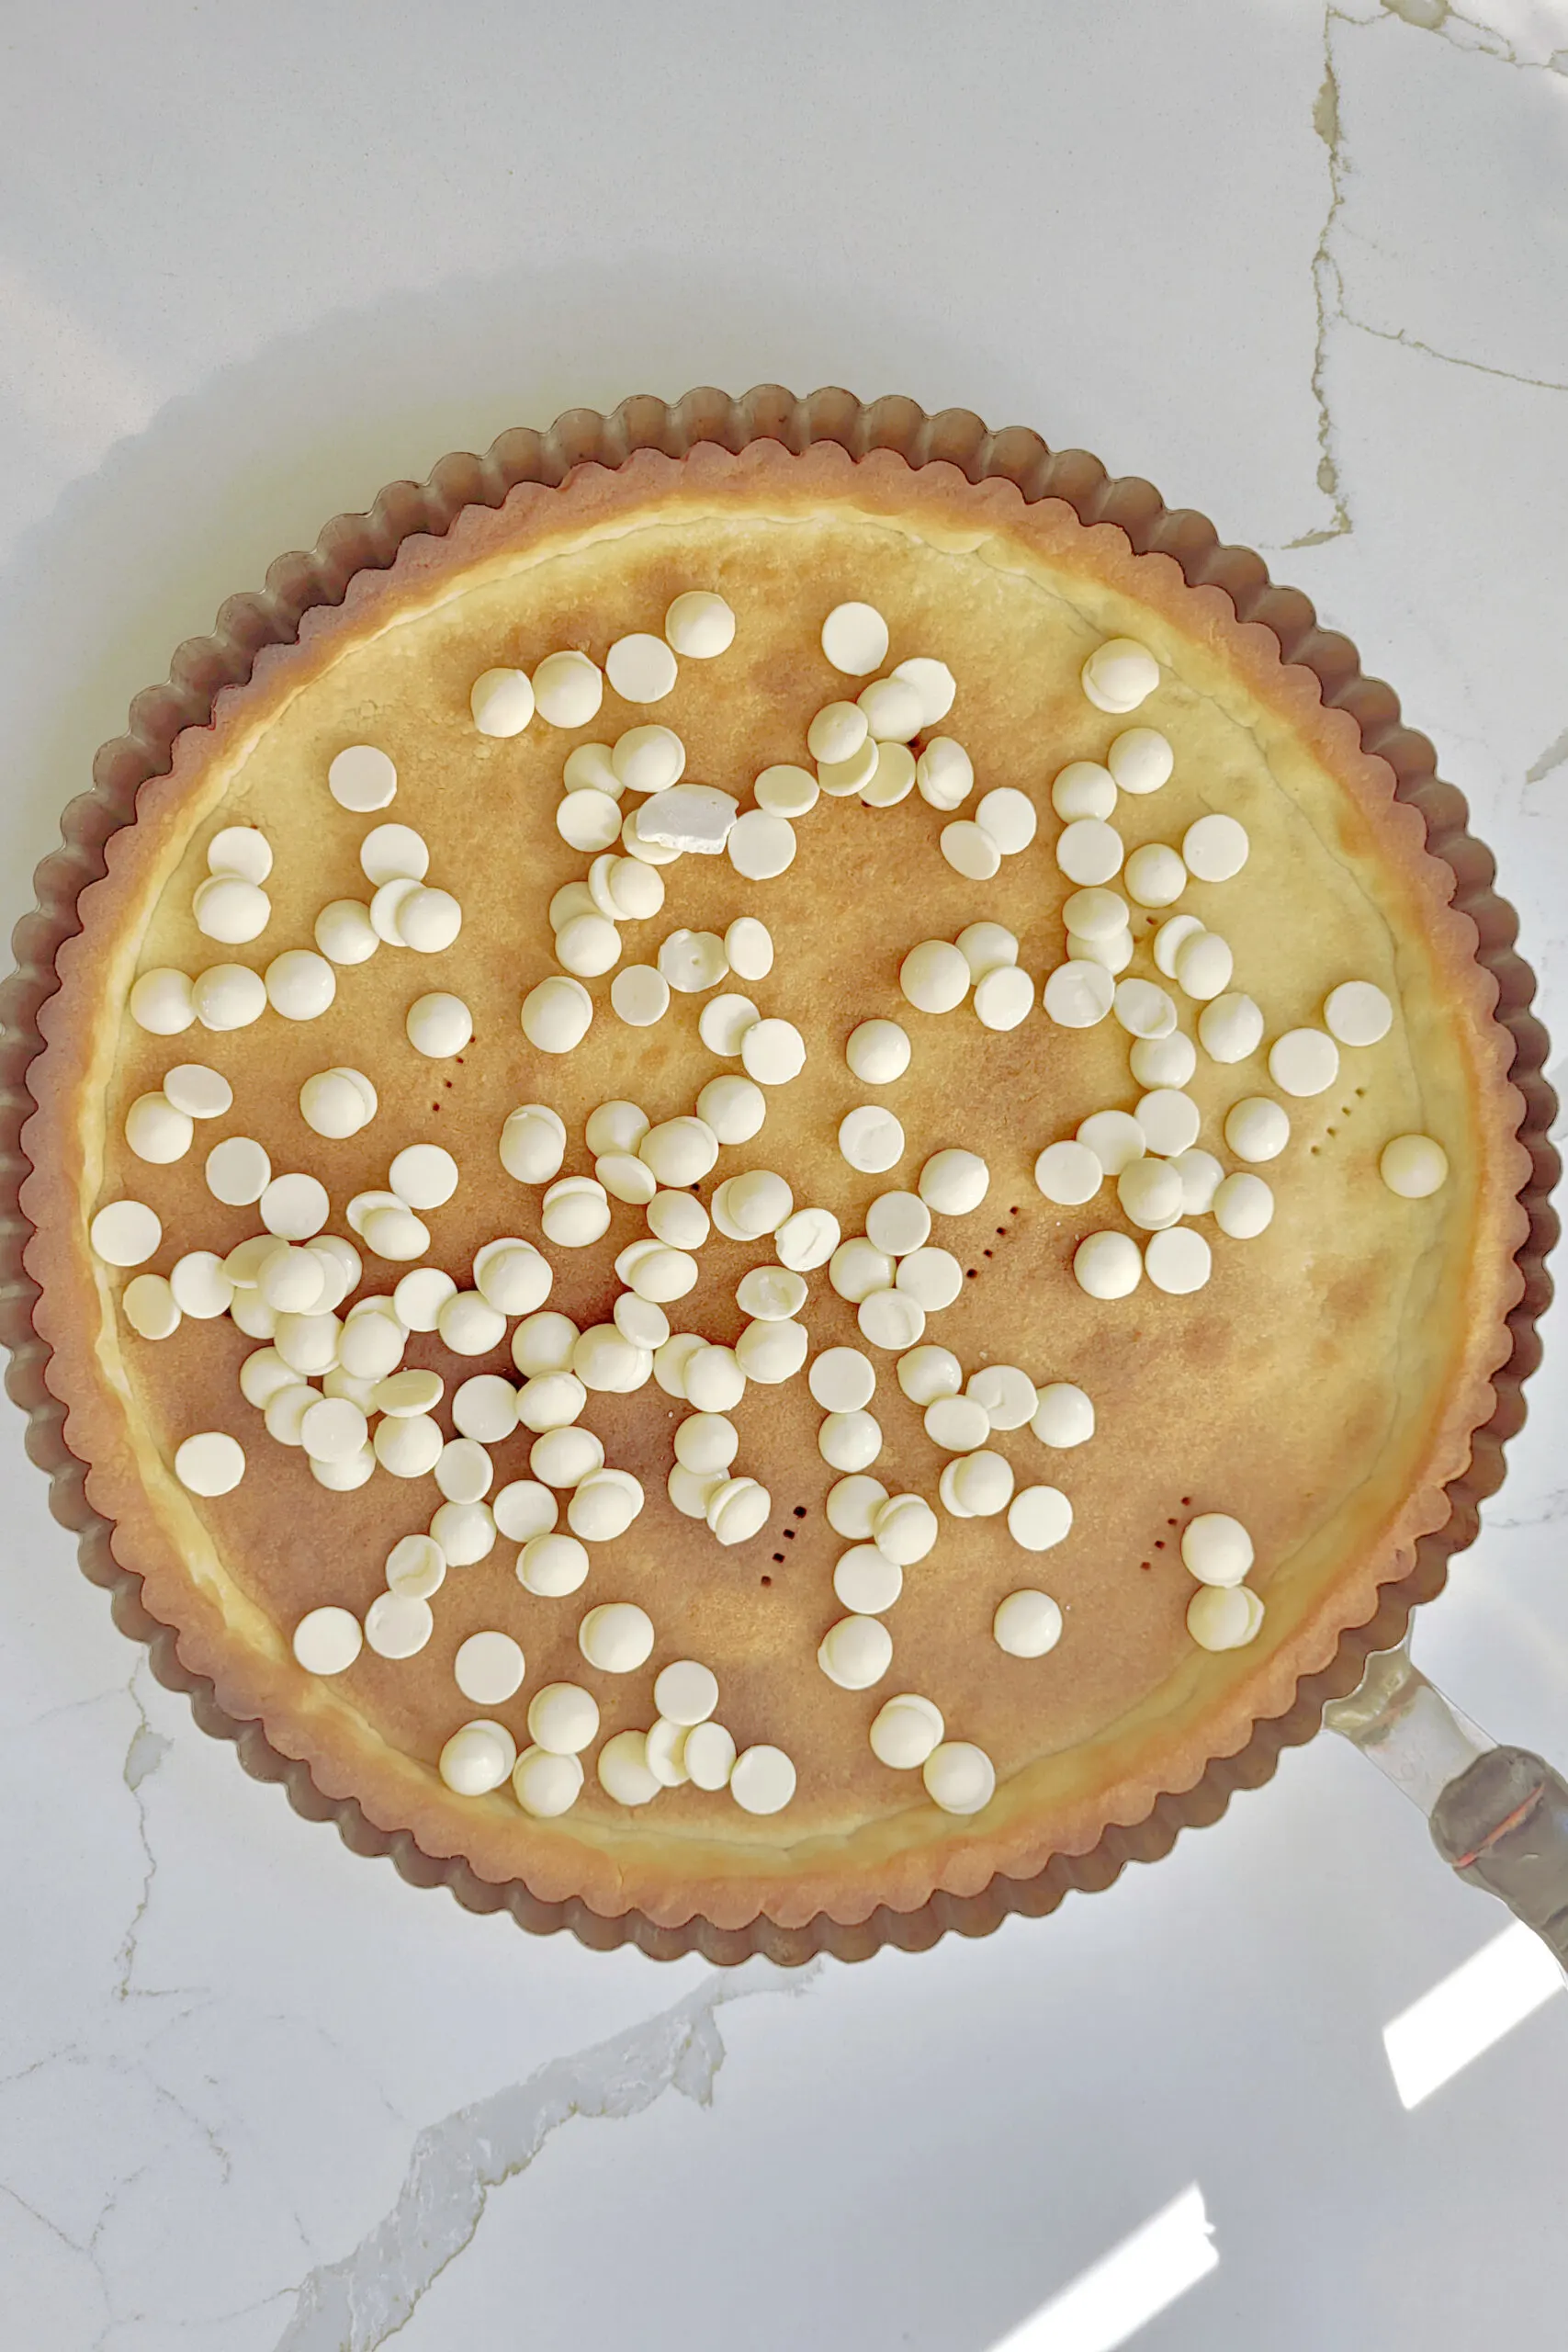 an empty tart shell with white chocolate chips.